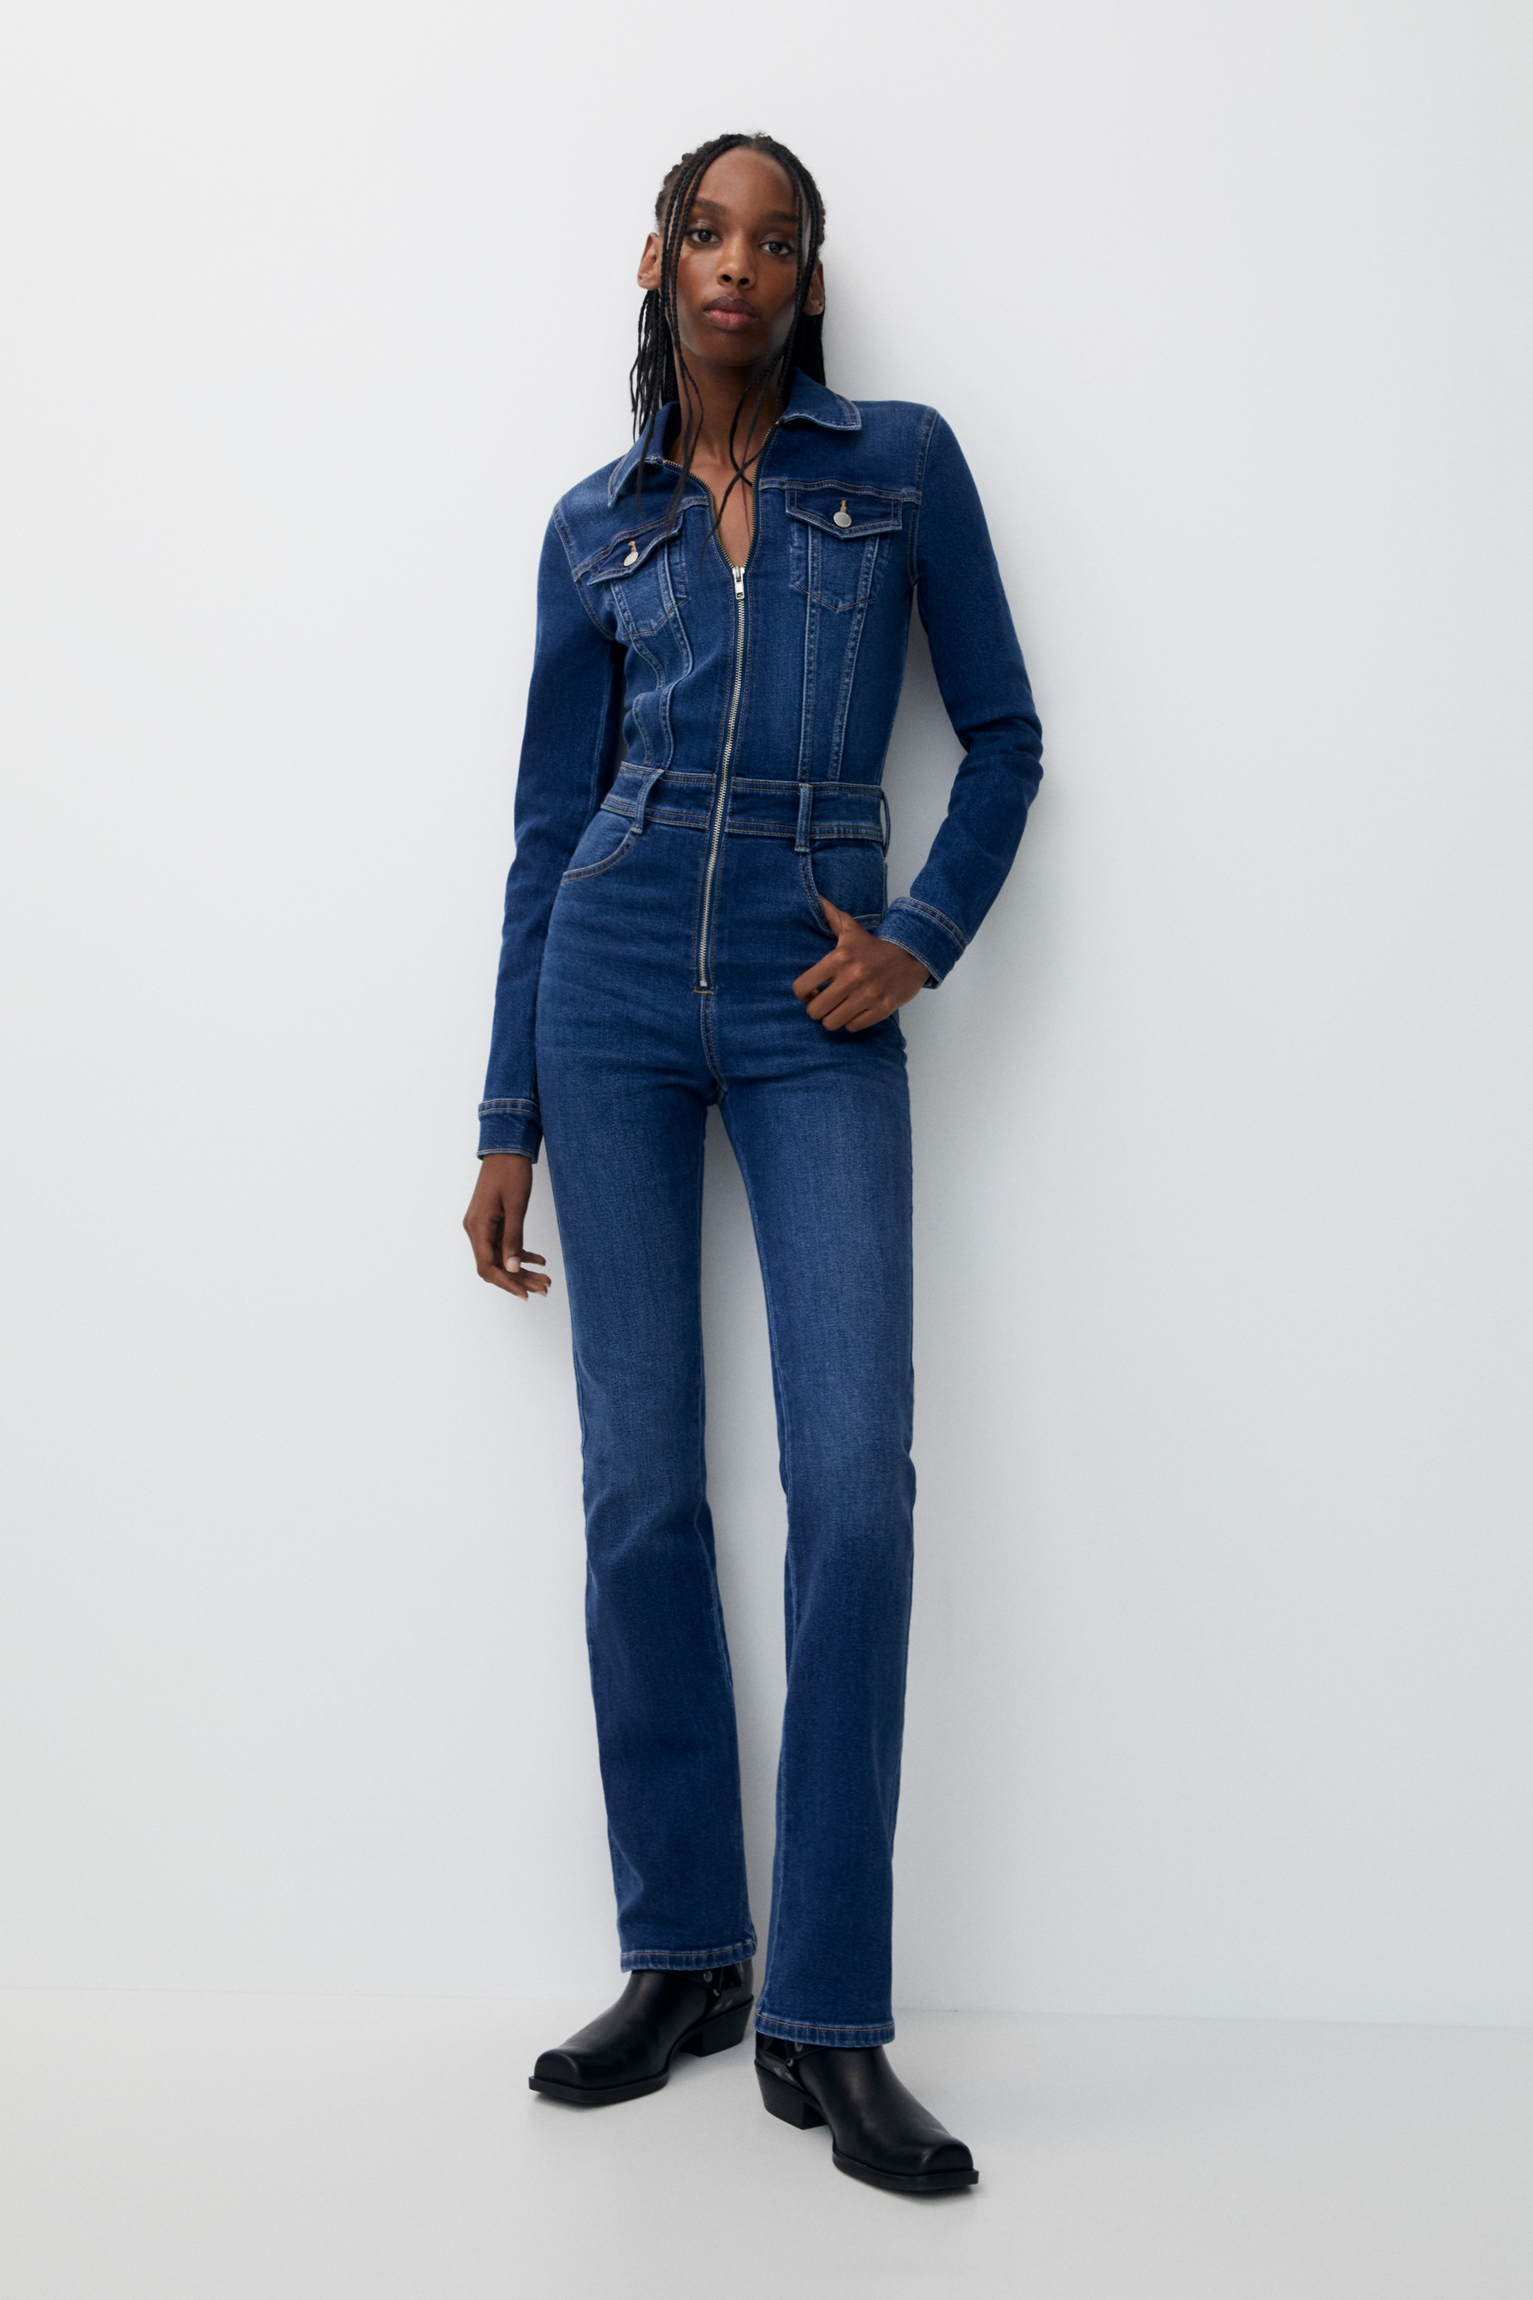 Shein denim jumpsuit with belt by High-Buy